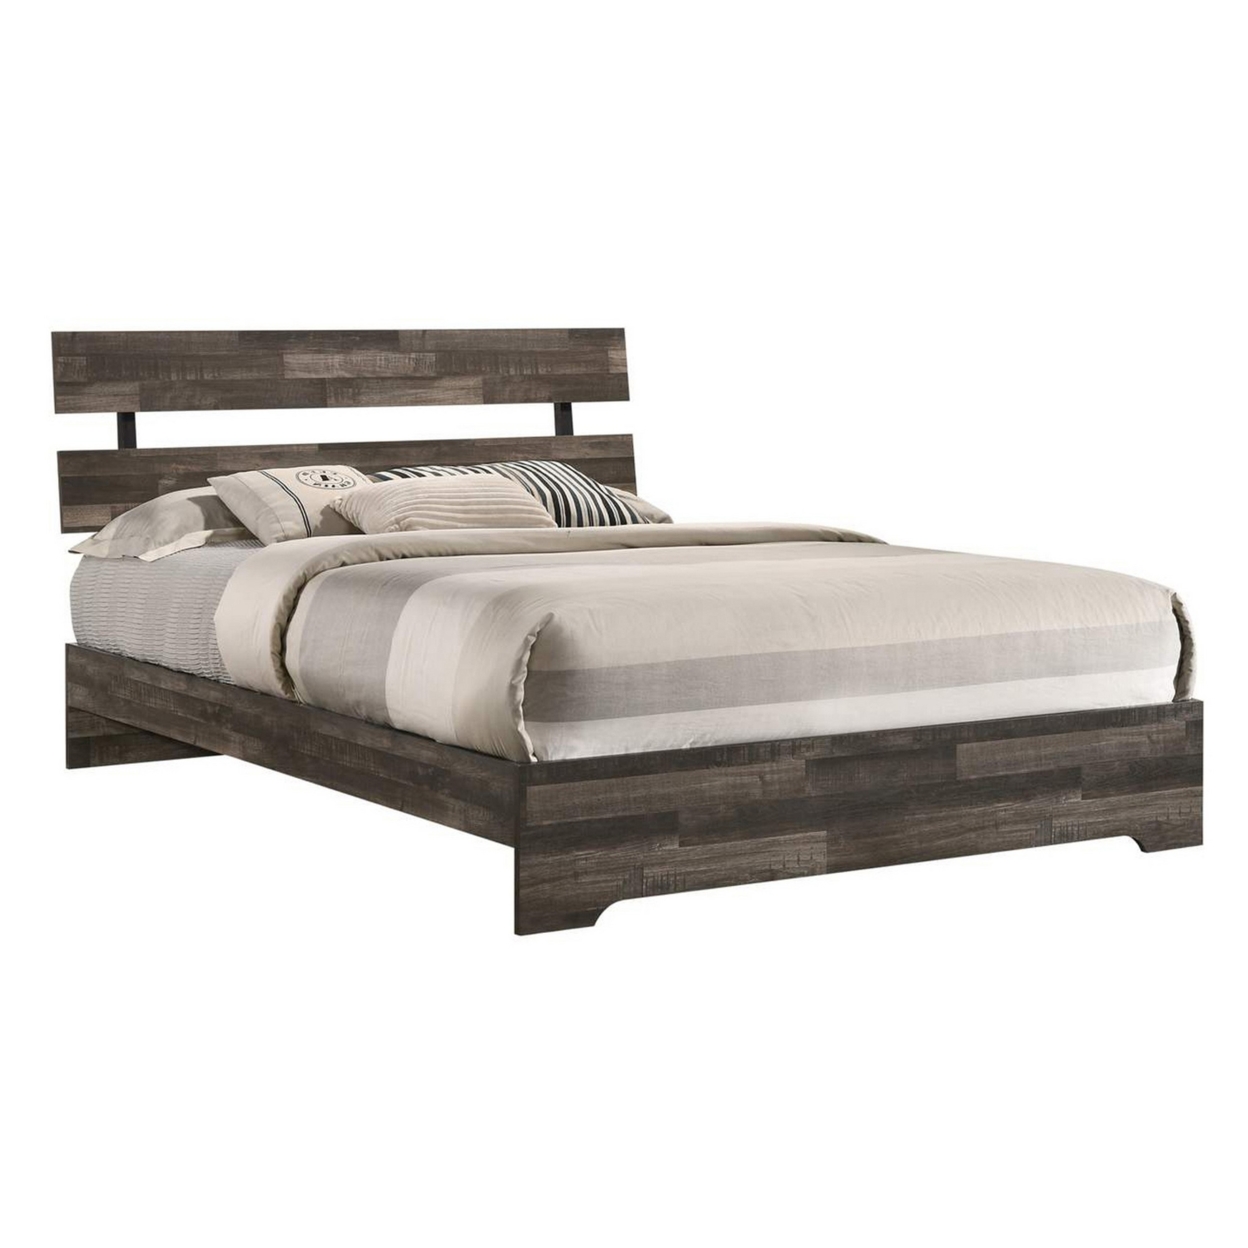 Full Bed With Rustic Heavy Grain Details And Panel Design, Brown- Saltoro Sherpi